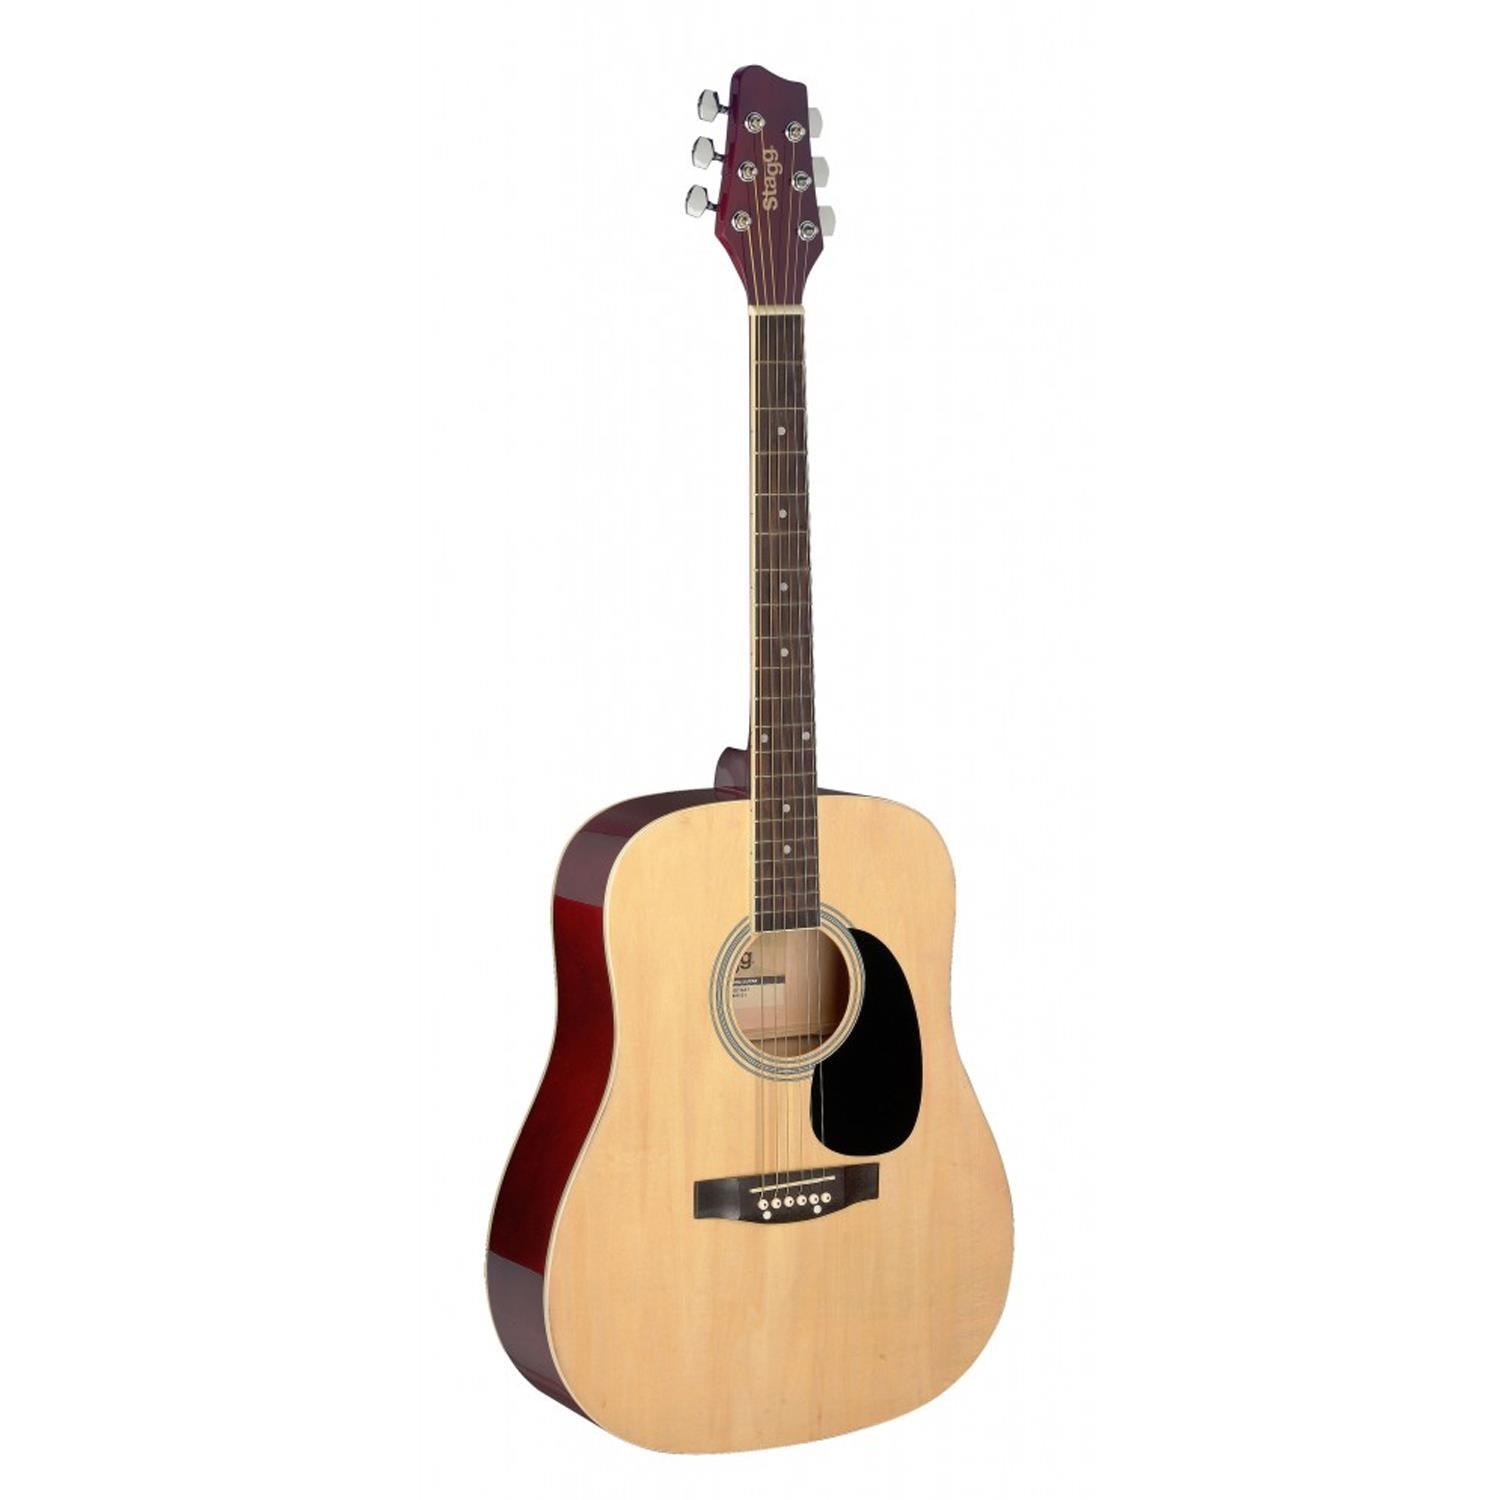 Stagg SA20D 1/2 N Natural Dreadnought Acoustic Guitar - DY Pro Audio